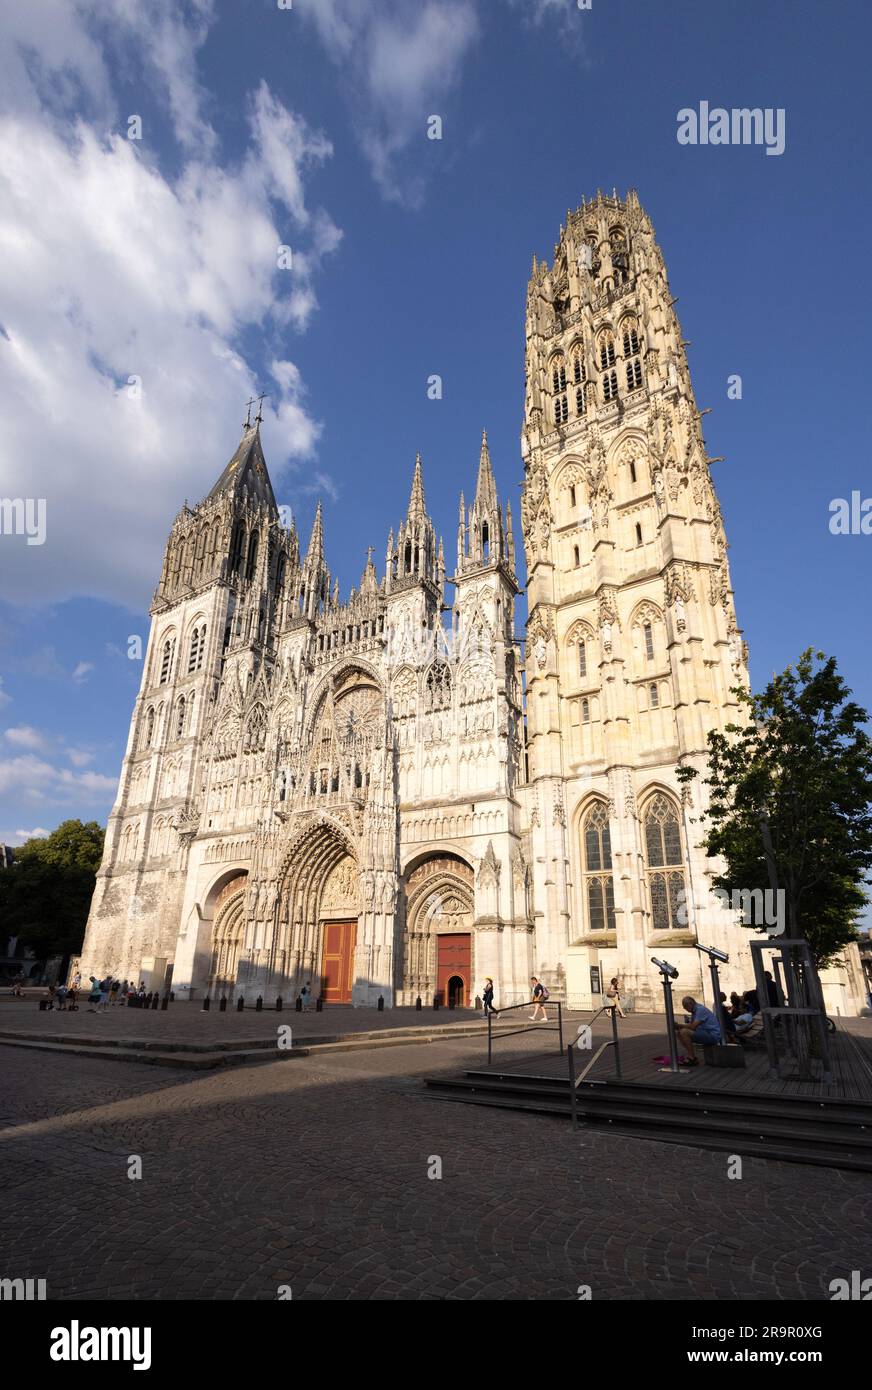 West Front, Rouen Cathedral exterior, or Notre Dame Cathedral, Rouen; 13th century Gothic architecture, See of the Archbishop of Rouen; Rouen France Stock Photo